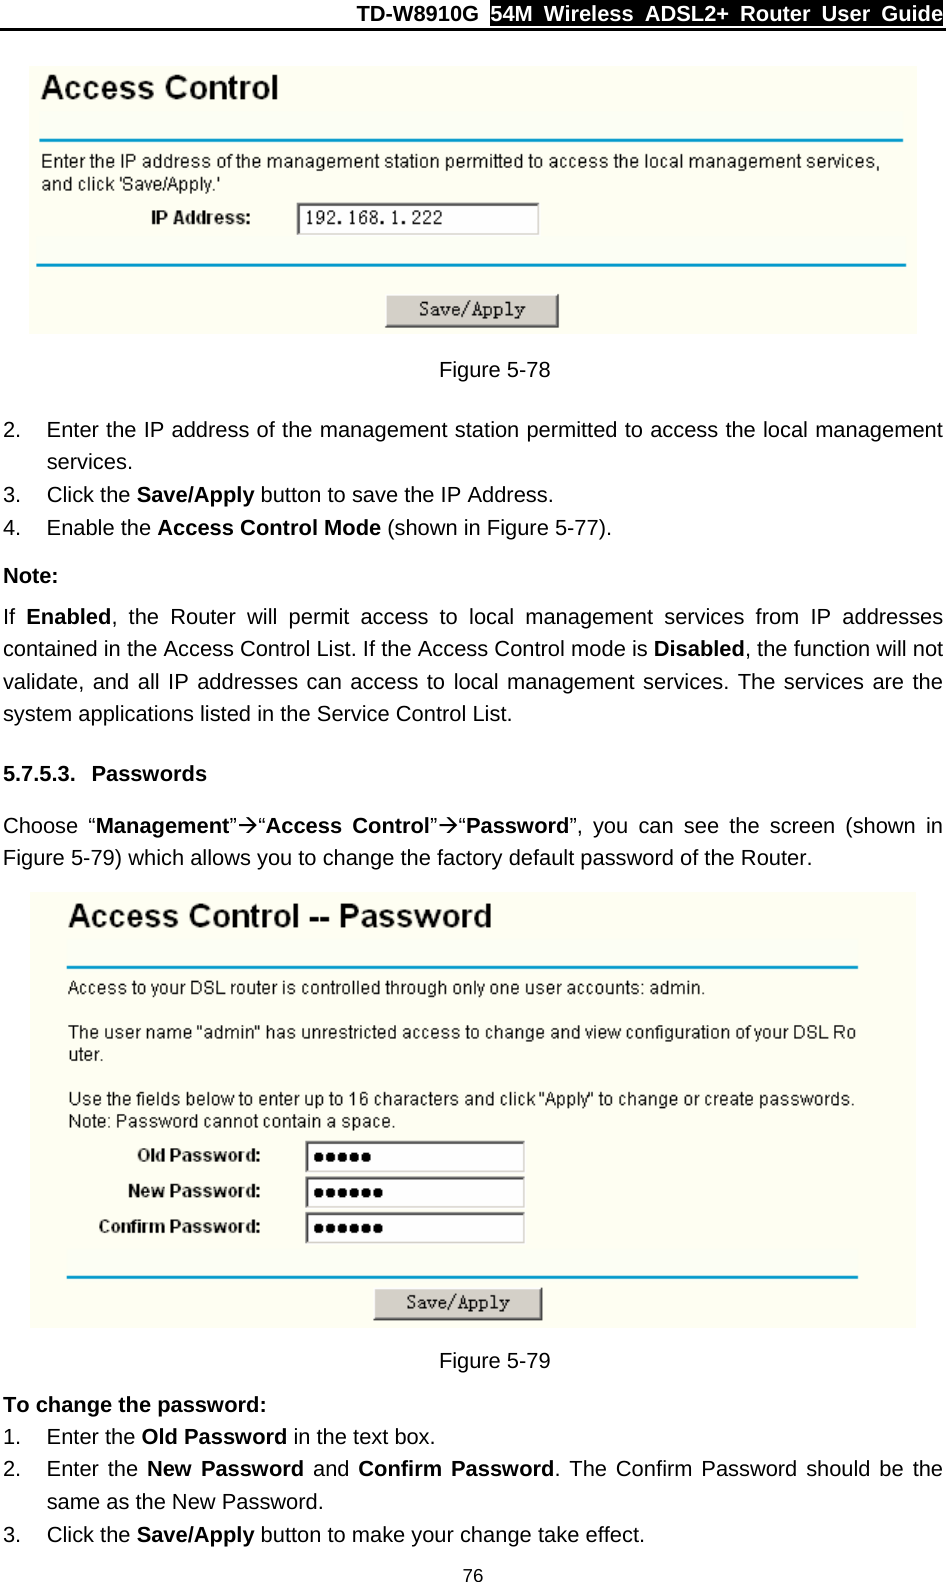 TD-W8910G  54M Wireless ADSL2+ Router User Guide  76 Figure 5-78 2.  Enter the IP address of the management station permitted to access the local management services. 3. Click the Save/Apply button to save the IP Address. 4. Enable the Access Control Mode (shown in Figure 5-77). Note: If  Enabled, the Router will permit access to local management services from IP addresses contained in the Access Control List. If the Access Control mode is Disabled, the function will not validate, and all IP addresses can access to local management services. The services are the system applications listed in the Service Control List. 5.7.5.3. Passwords Choose “Management”Æ“Access Control”Æ“Password”, you can see the screen (shown in Figure 5-79) which allows you to change the factory default password of the Router.  Figure 5-79 To change the password: 1. Enter the Old Password in the text box. 2. Enter the New Password and Confirm Password. The Confirm Password should be the same as the New Password. 3. Click the Save/Apply button to make your change take effect. 